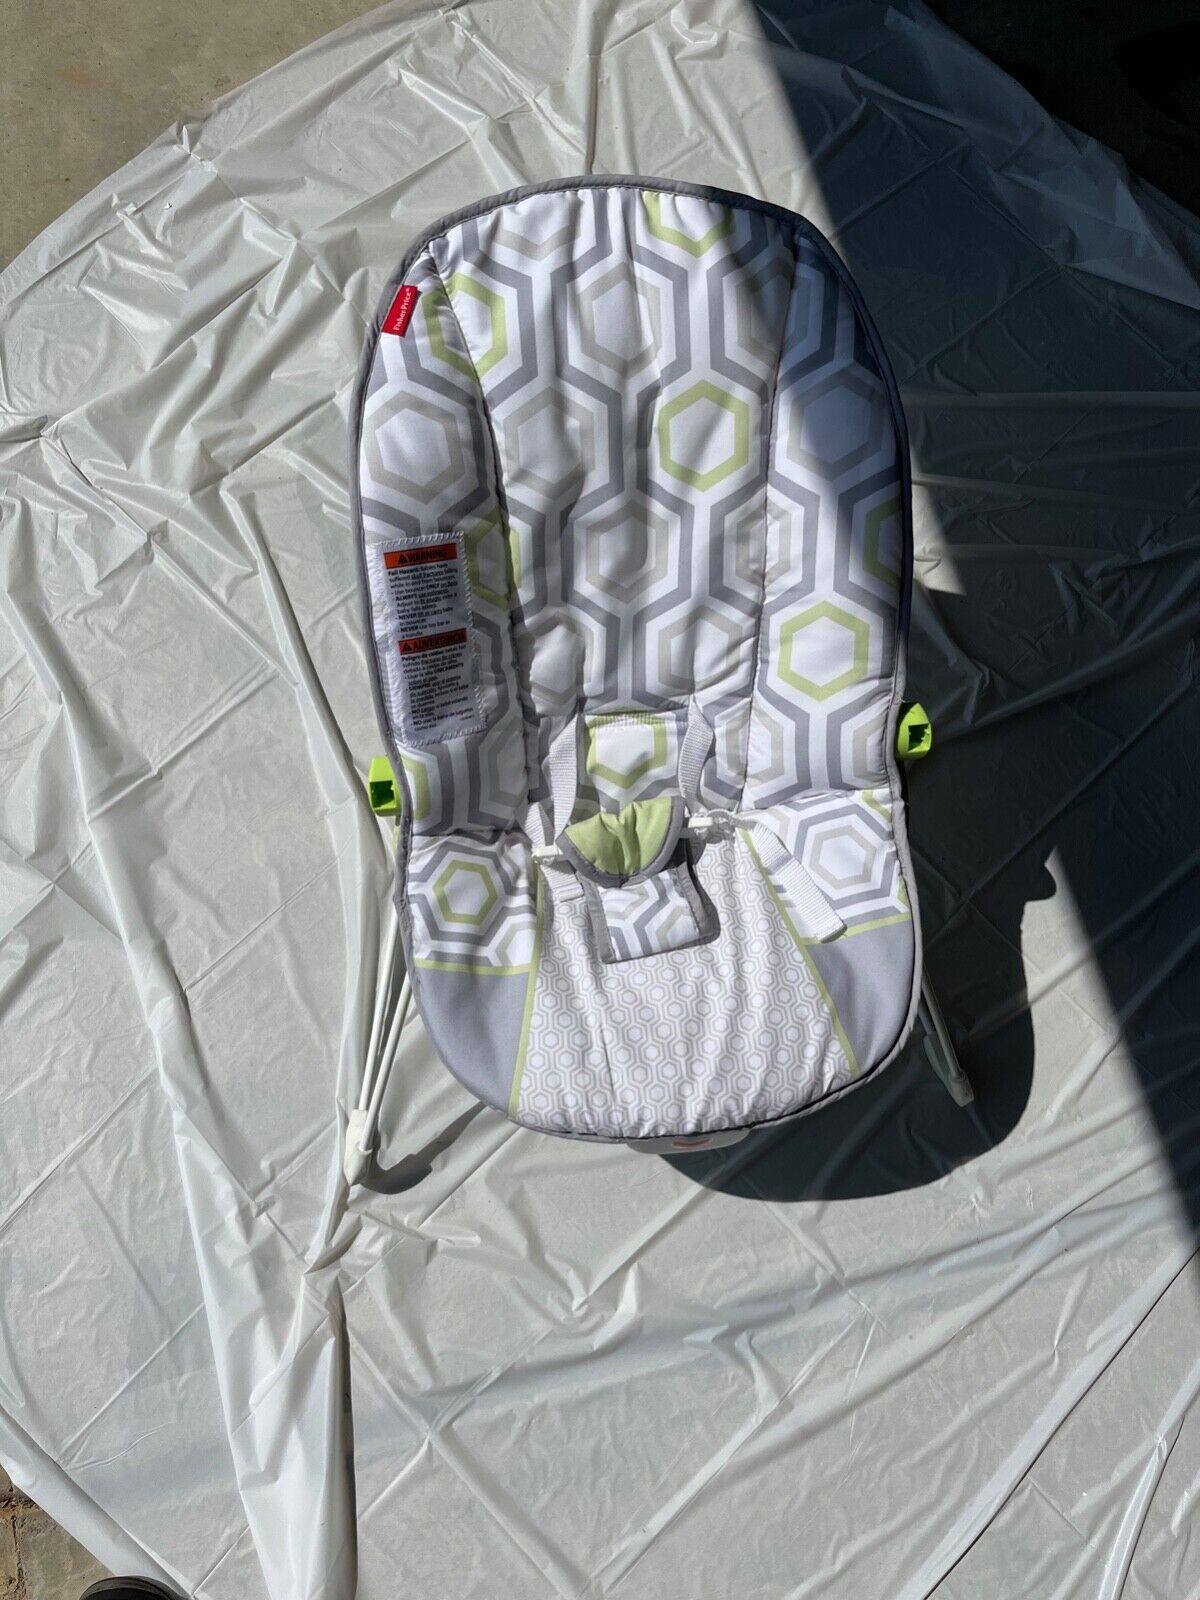 Fisher-price Baby Bouncer - Geo Meadow, Infant Soothing And Play Seat